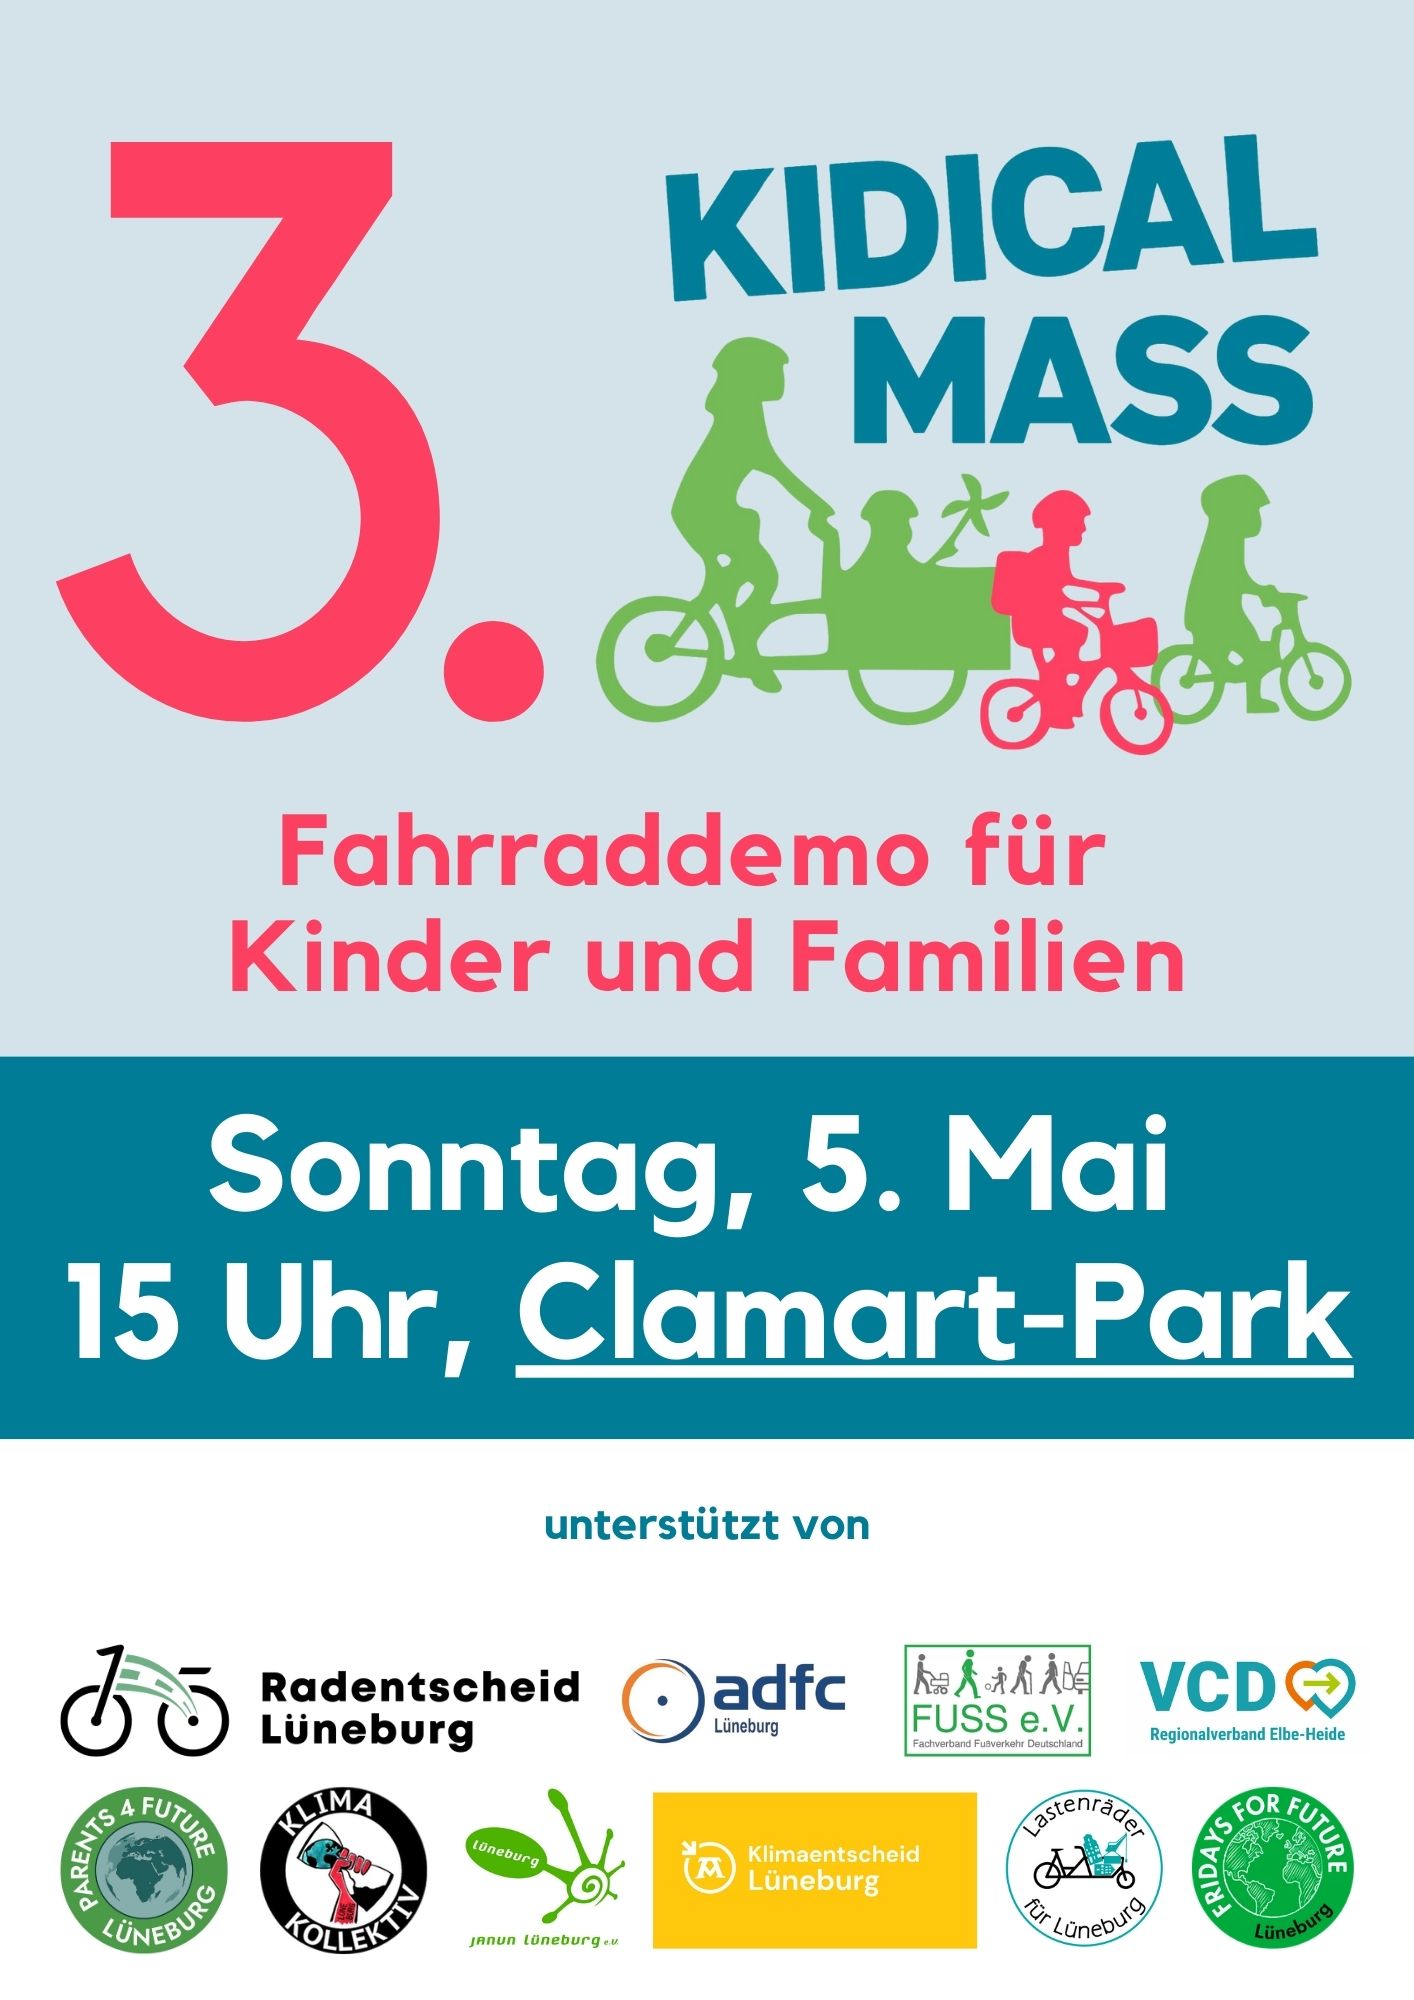 You are currently viewing SAVE THE DATE: 5. Mai, 15 Uhr Kidical Mass – familienfreundliche Fahrraddemo